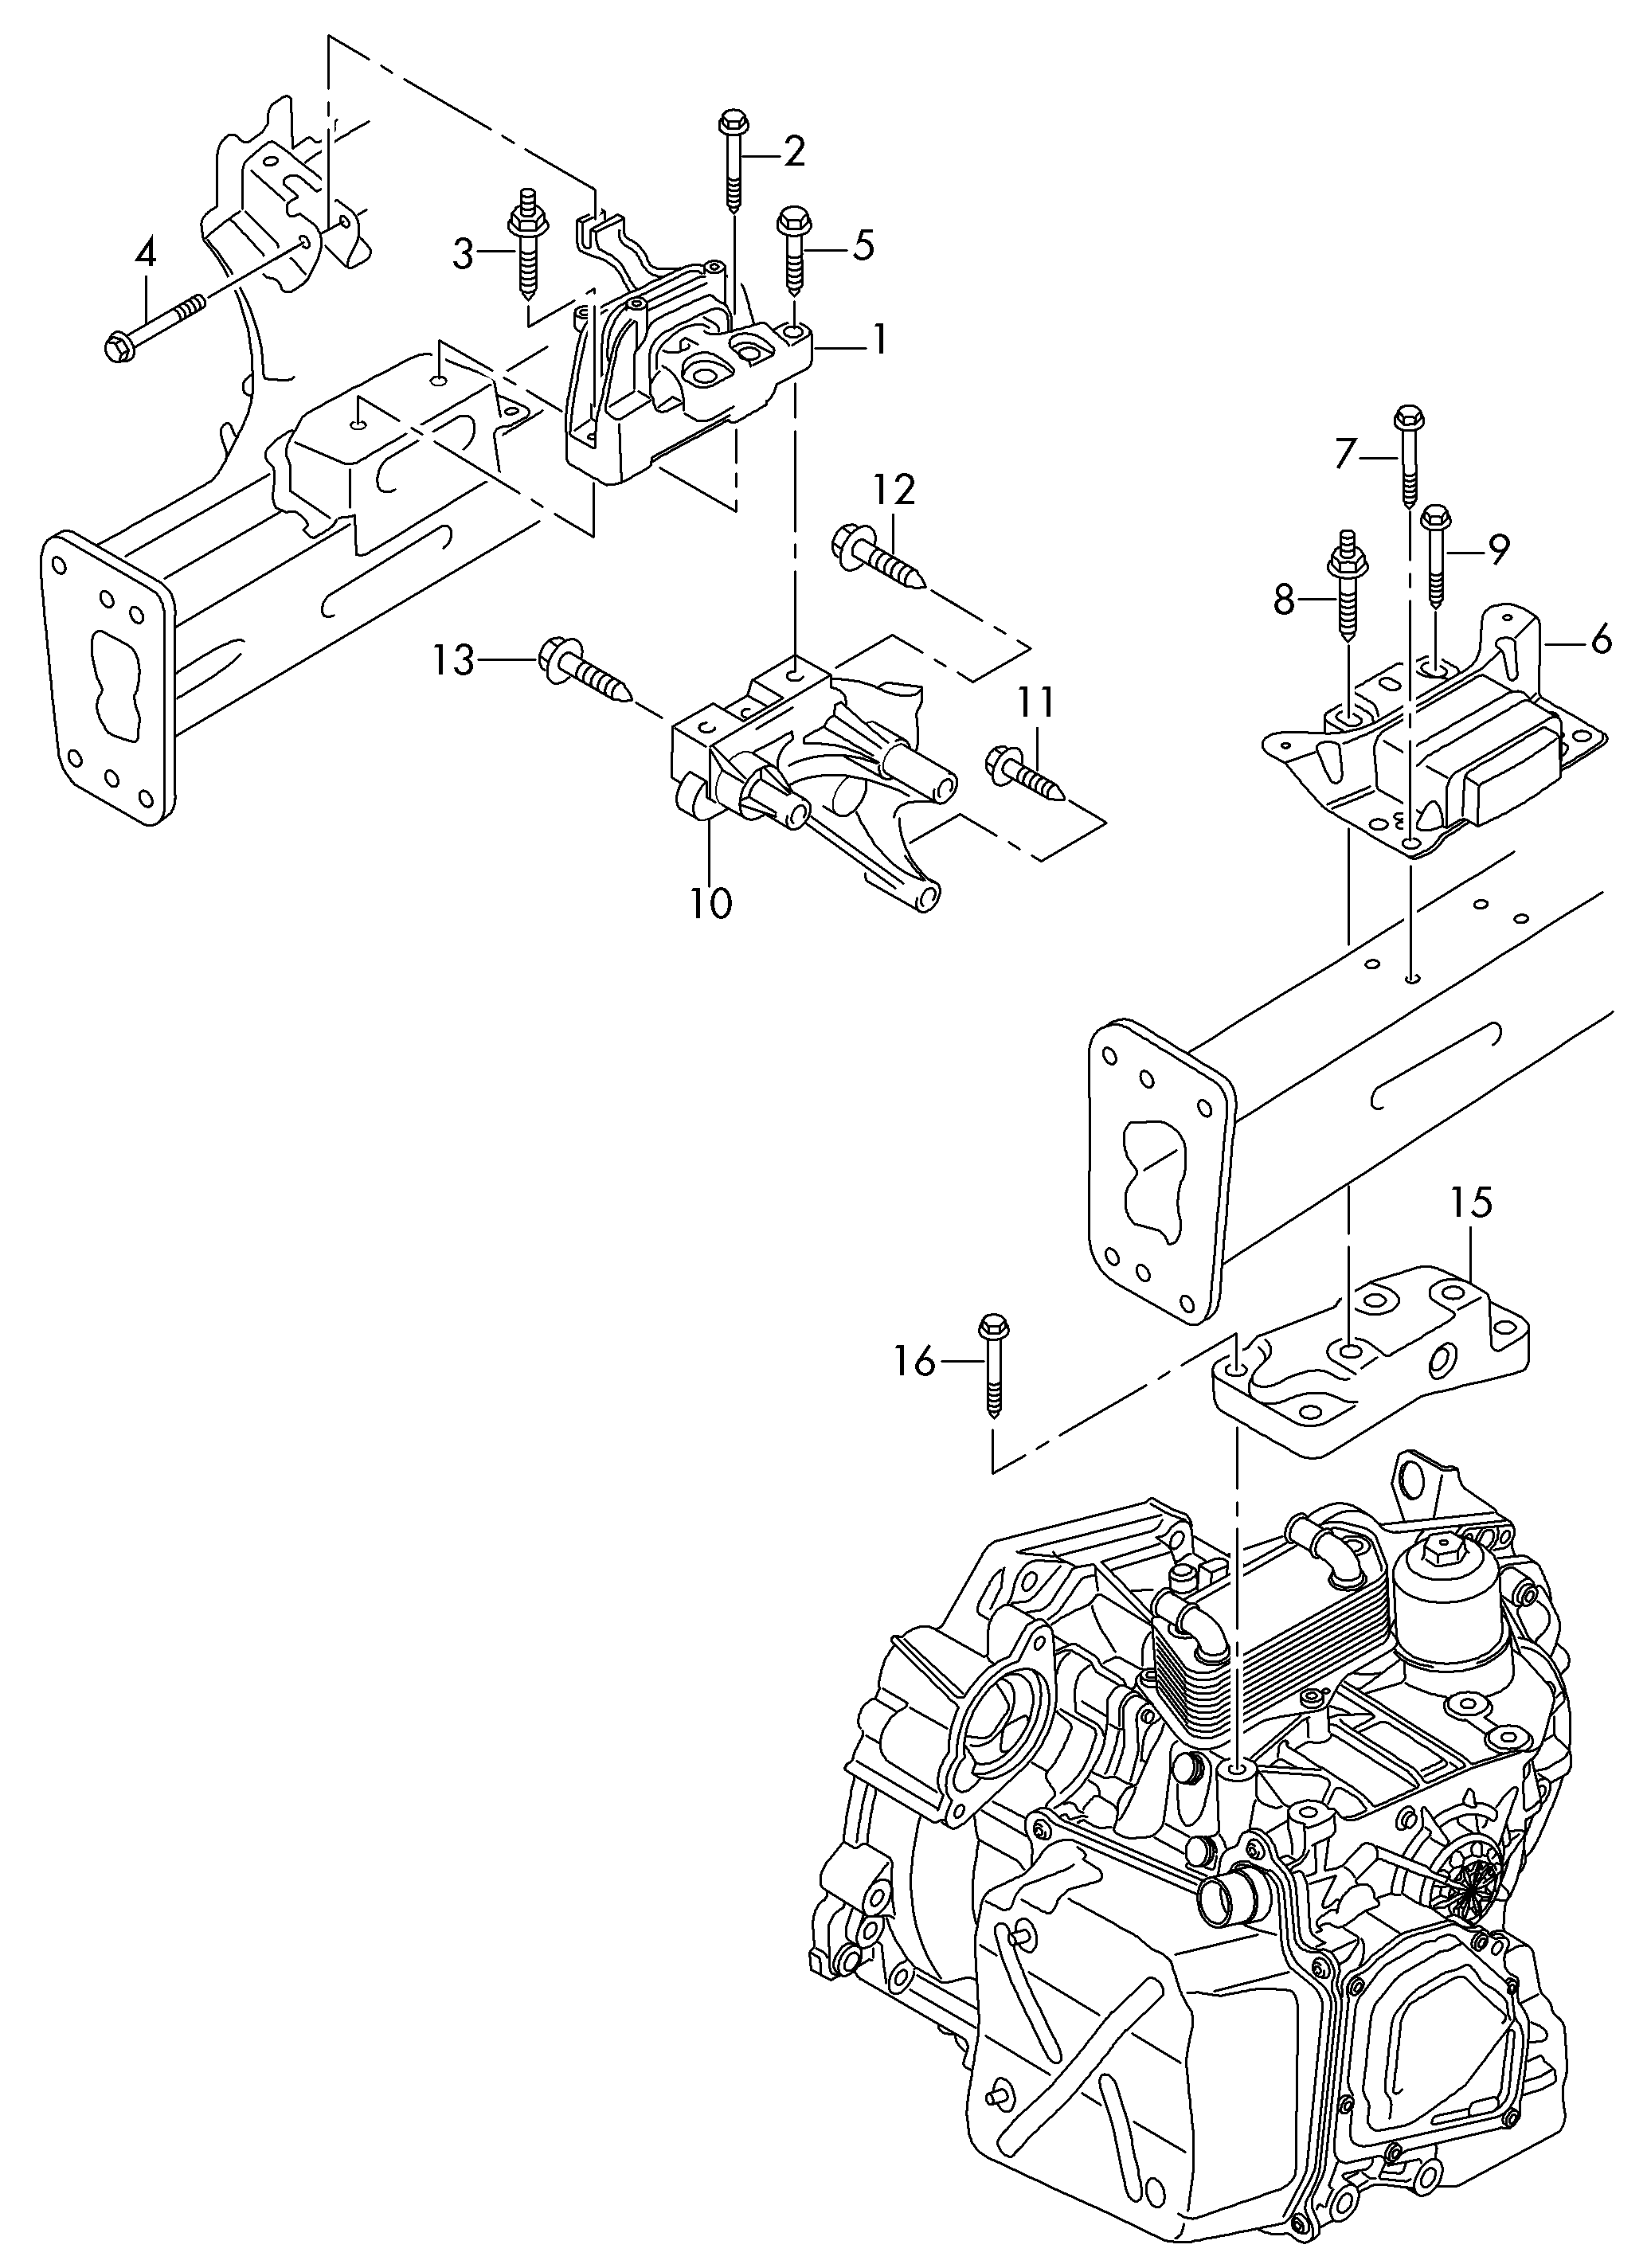 mounting parts for engine and<br>transmission 2.0 Ltr. - Golf - gom